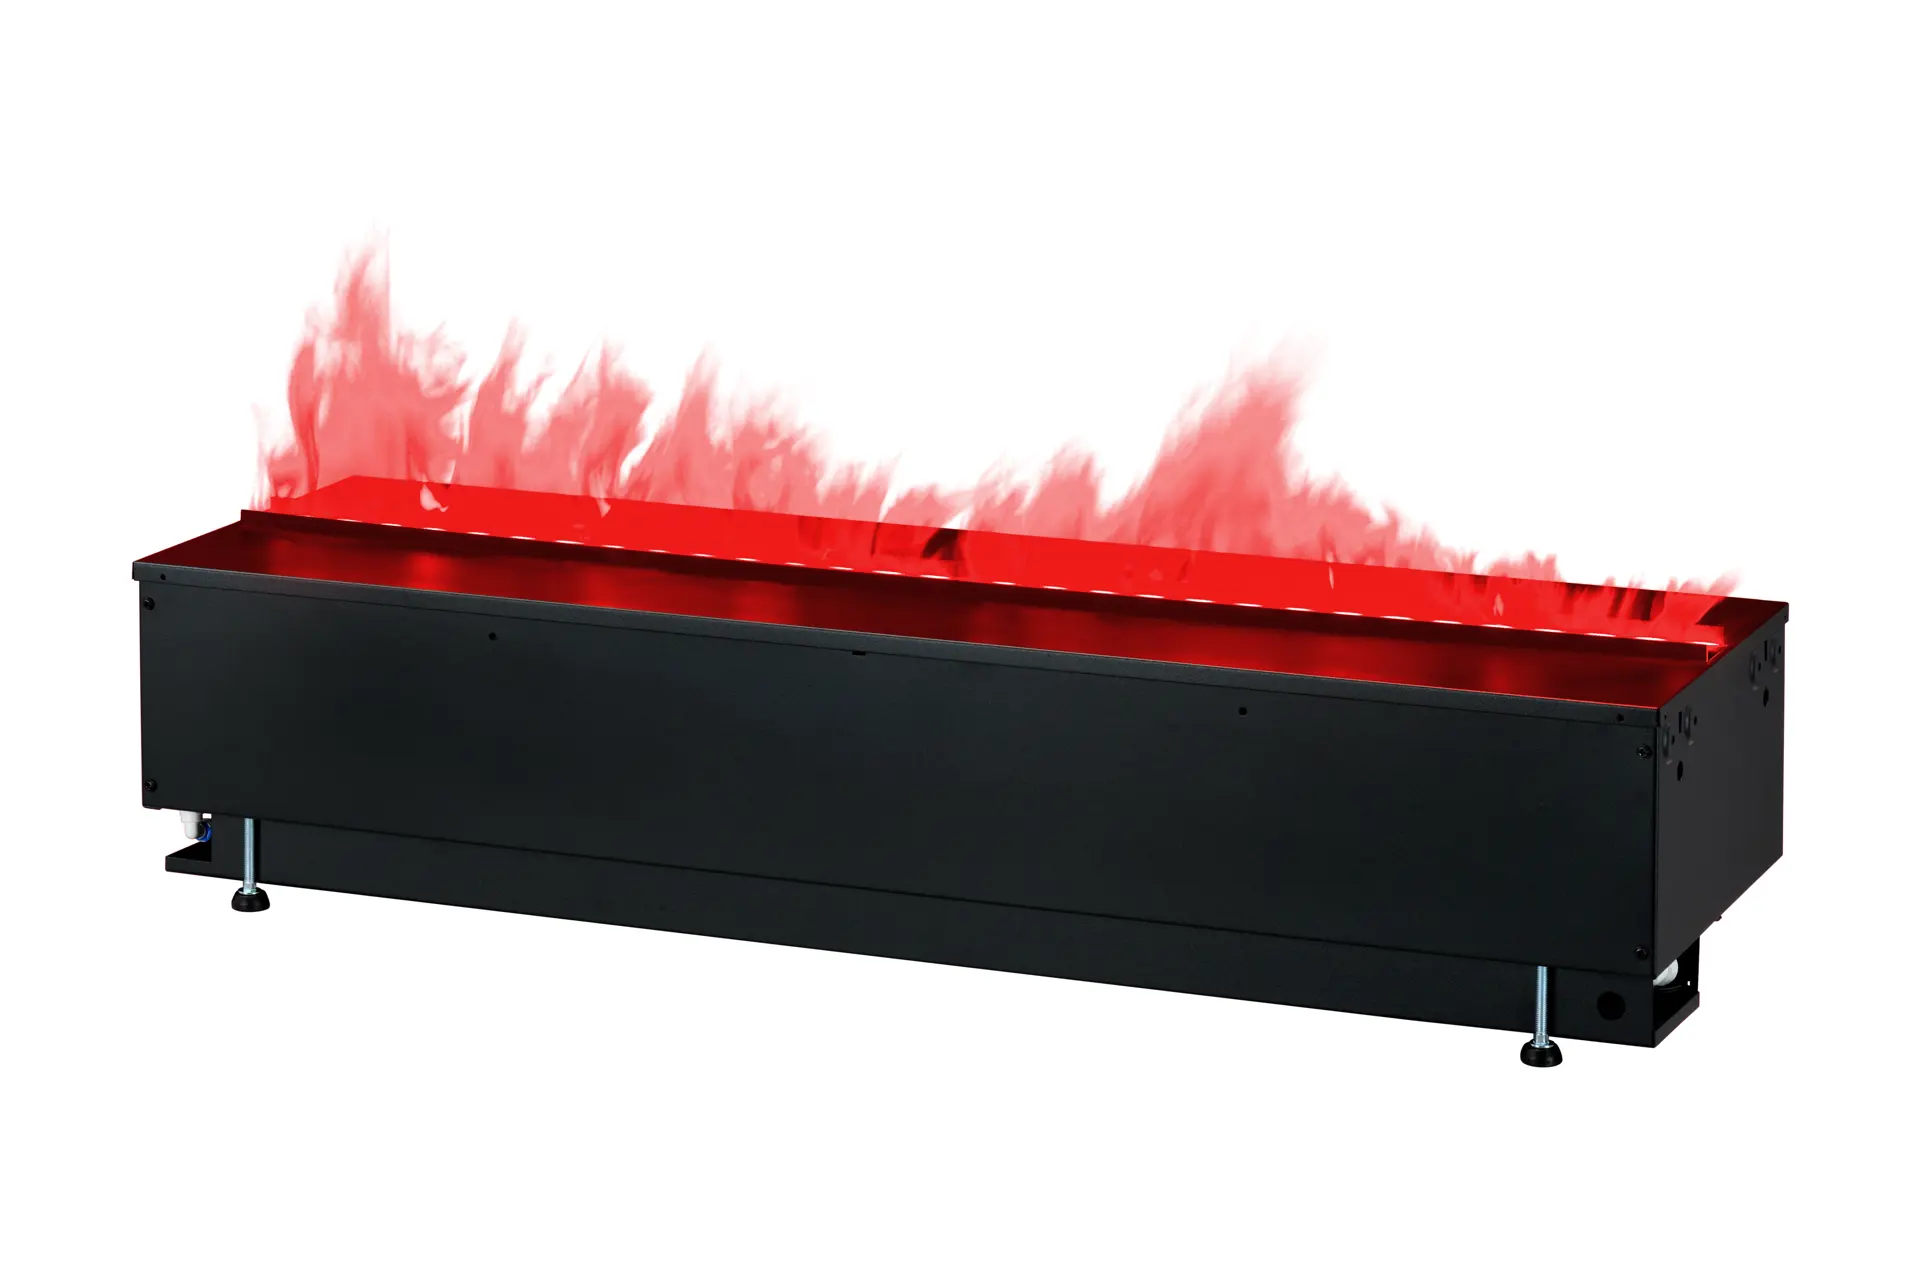 Dimplex_Cassette 1000 projects_400001275_Left Red Flame.jpg